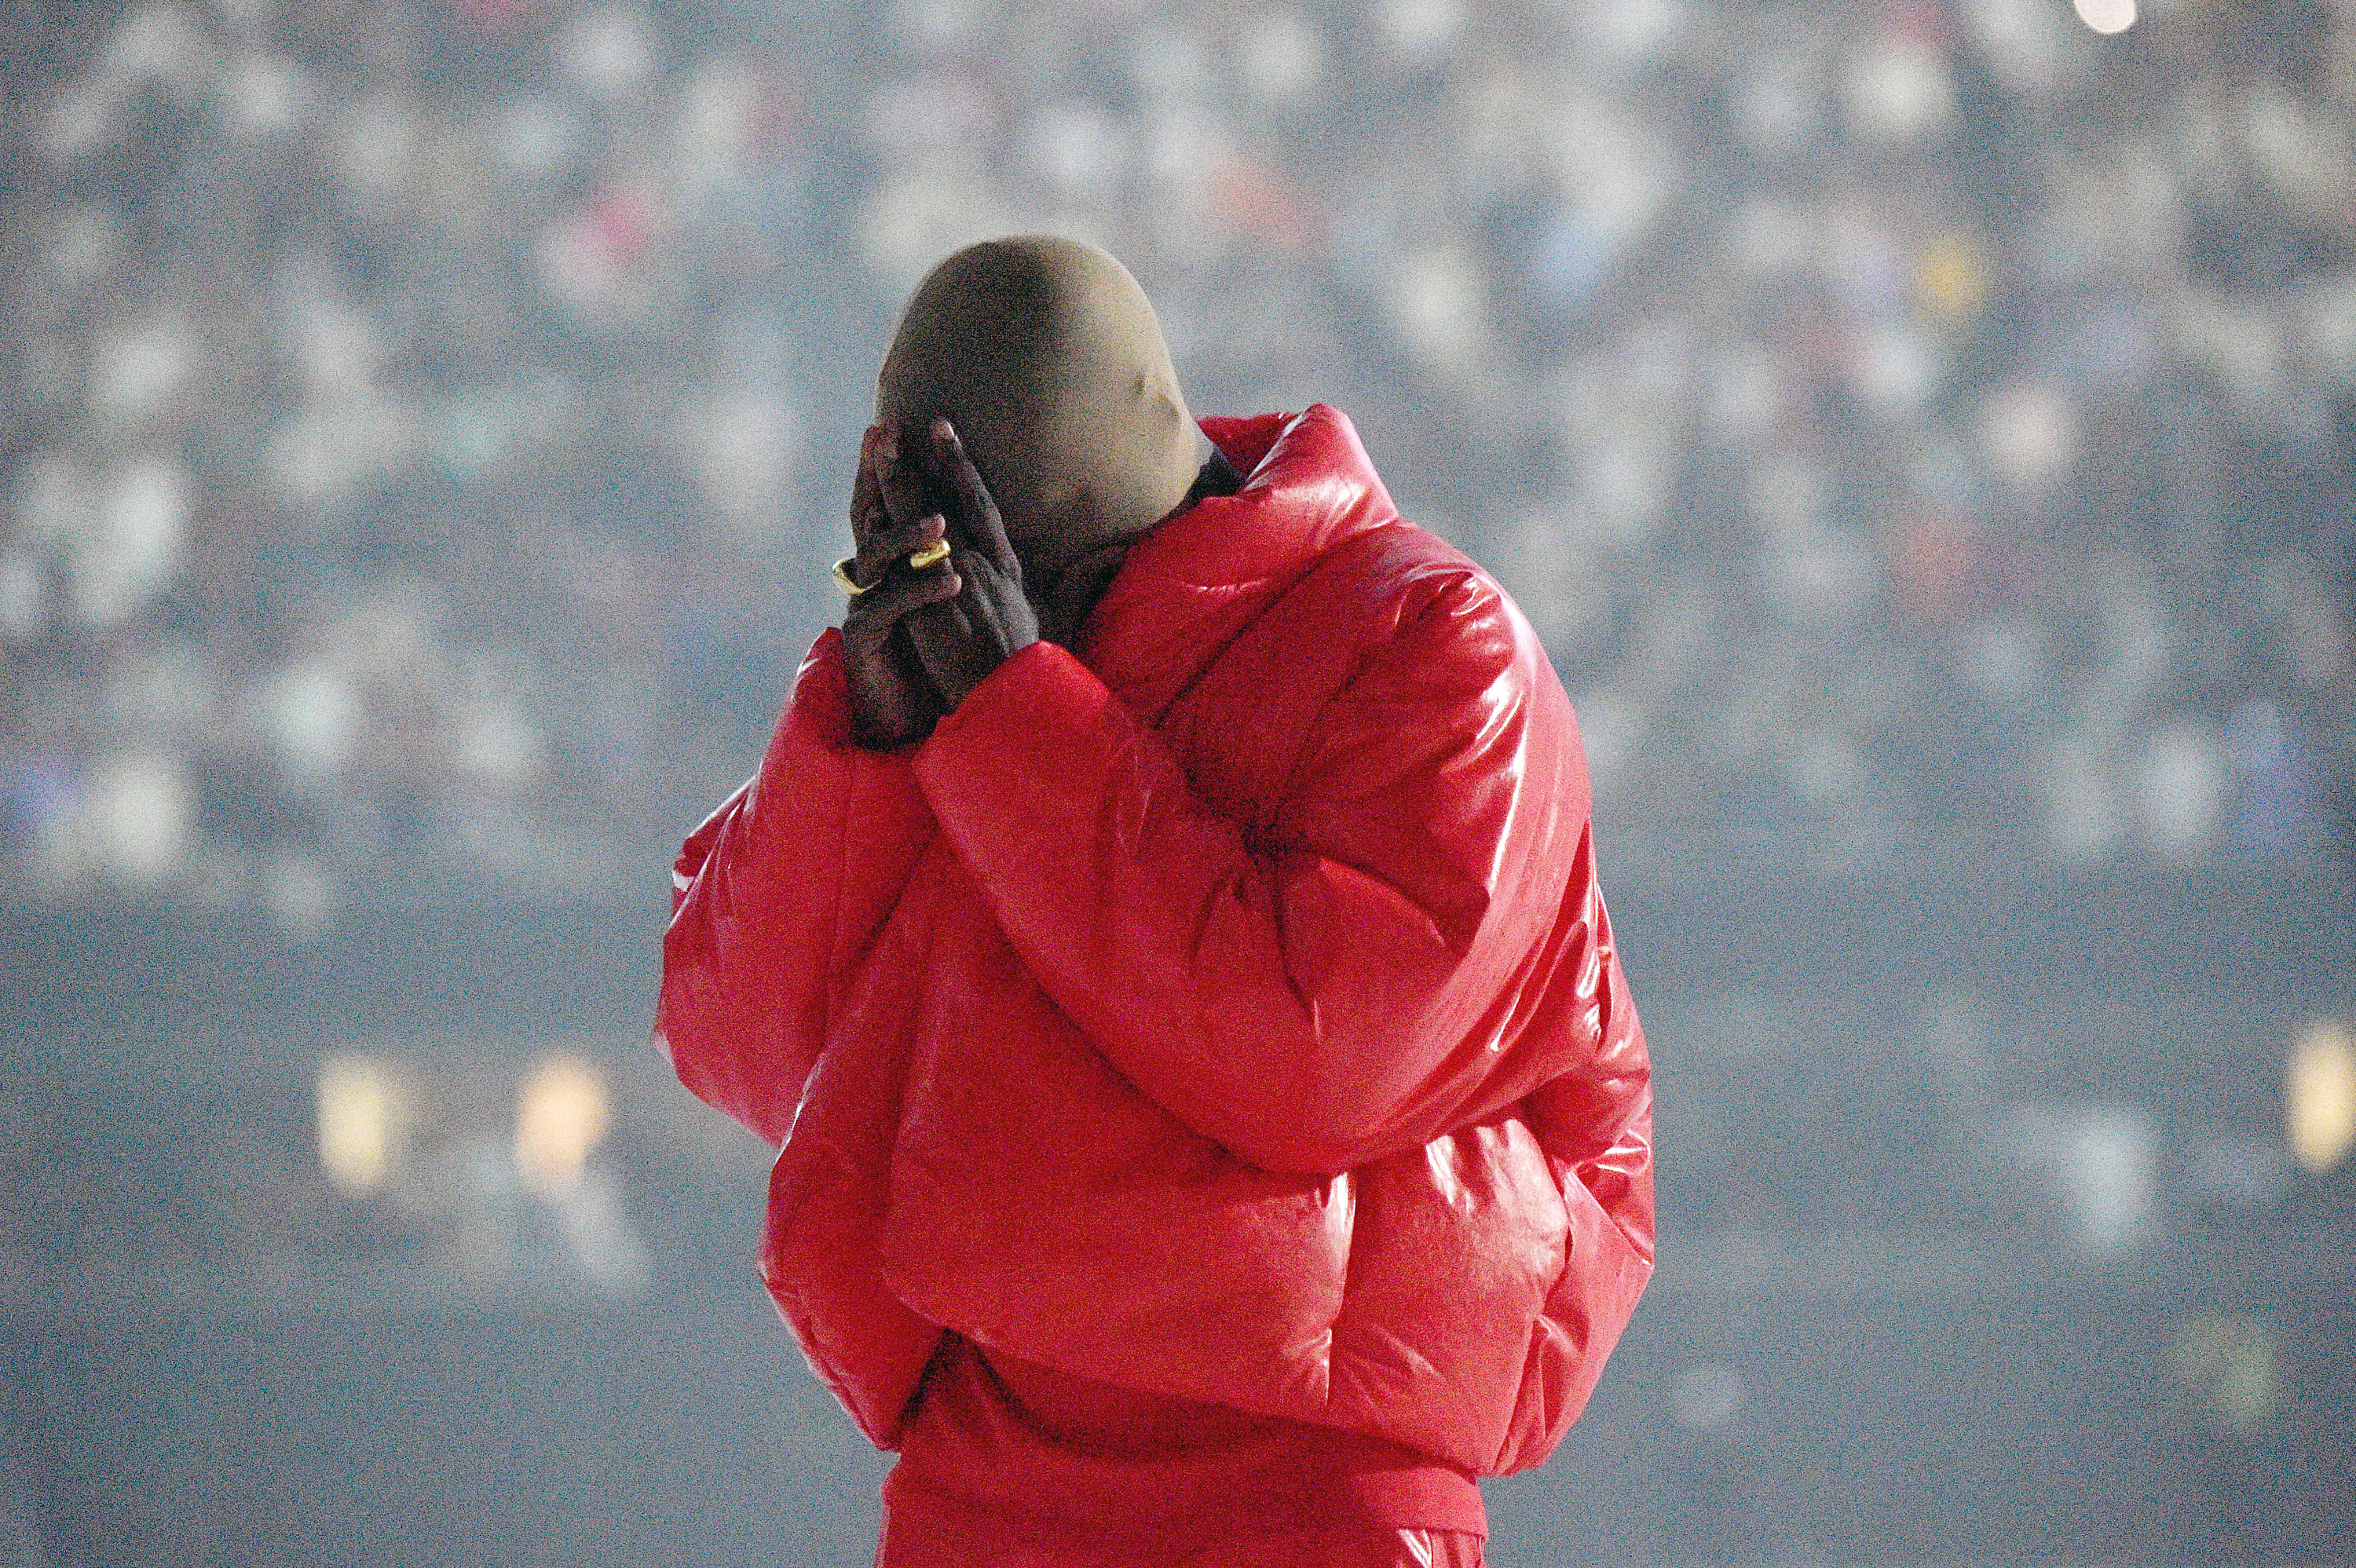 Kanye West is pictured wearing a red puffer coat at his Donda album listening event